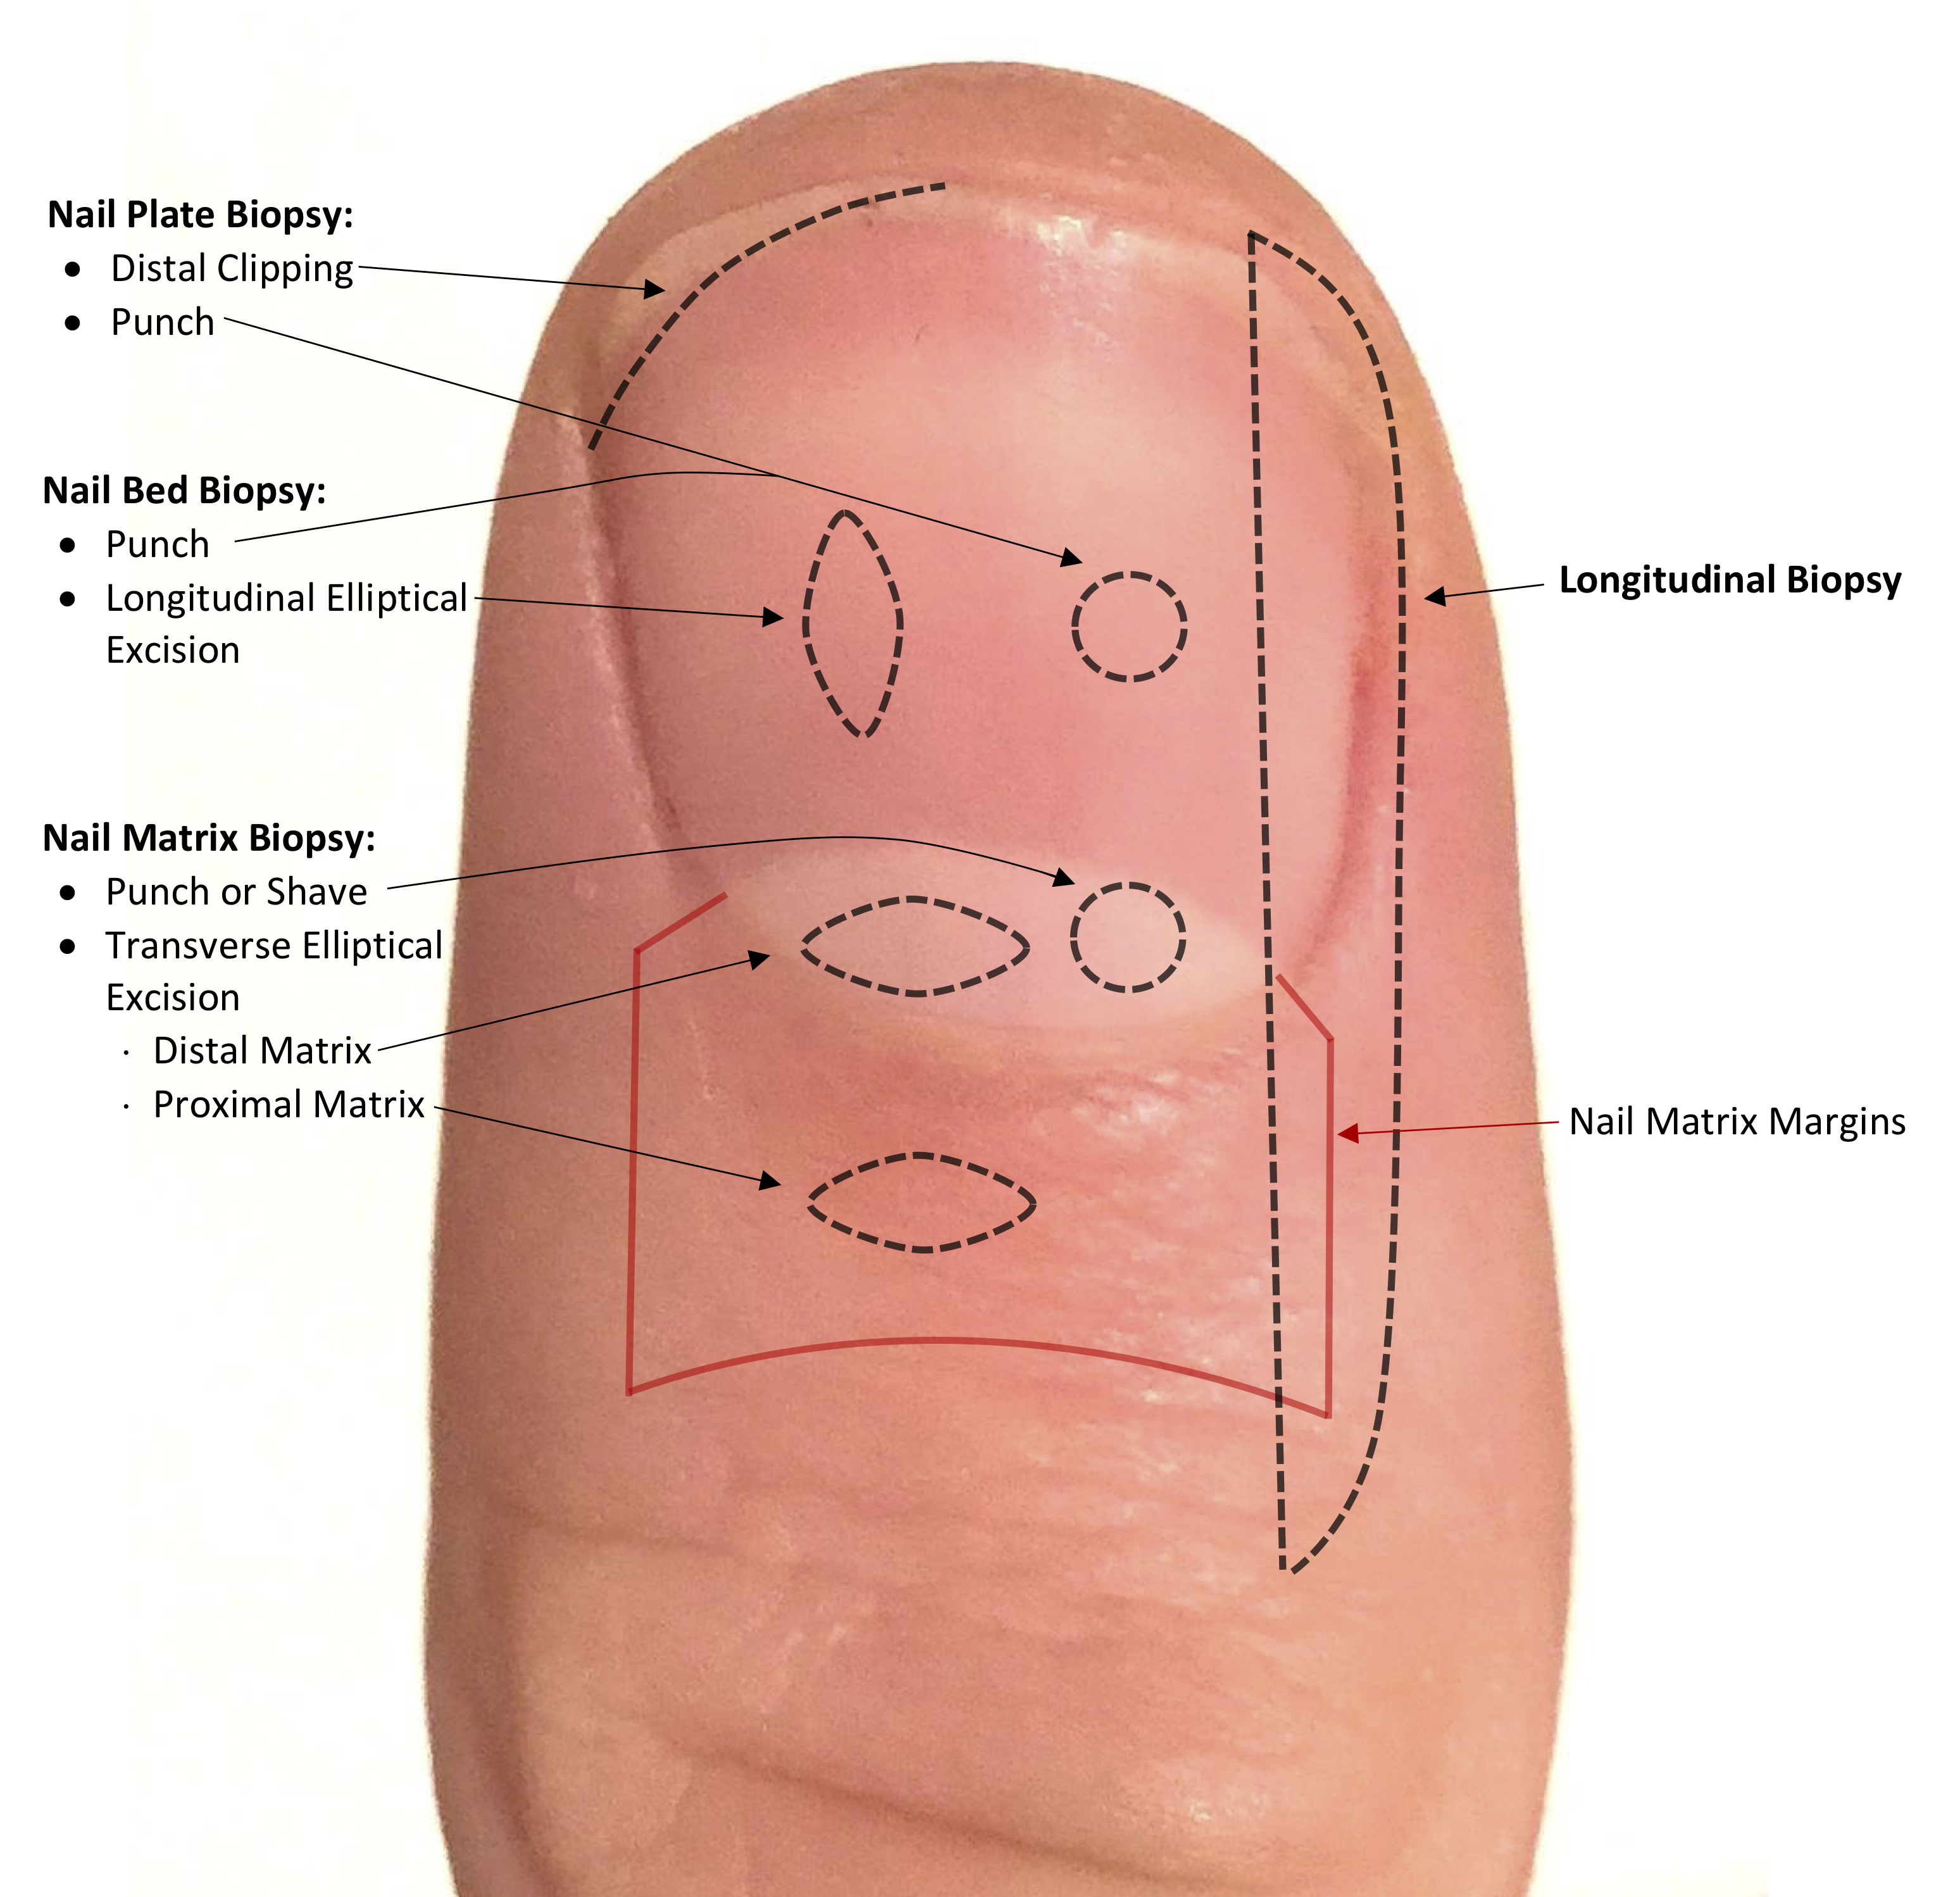 Location and orientation of nail biopsies.